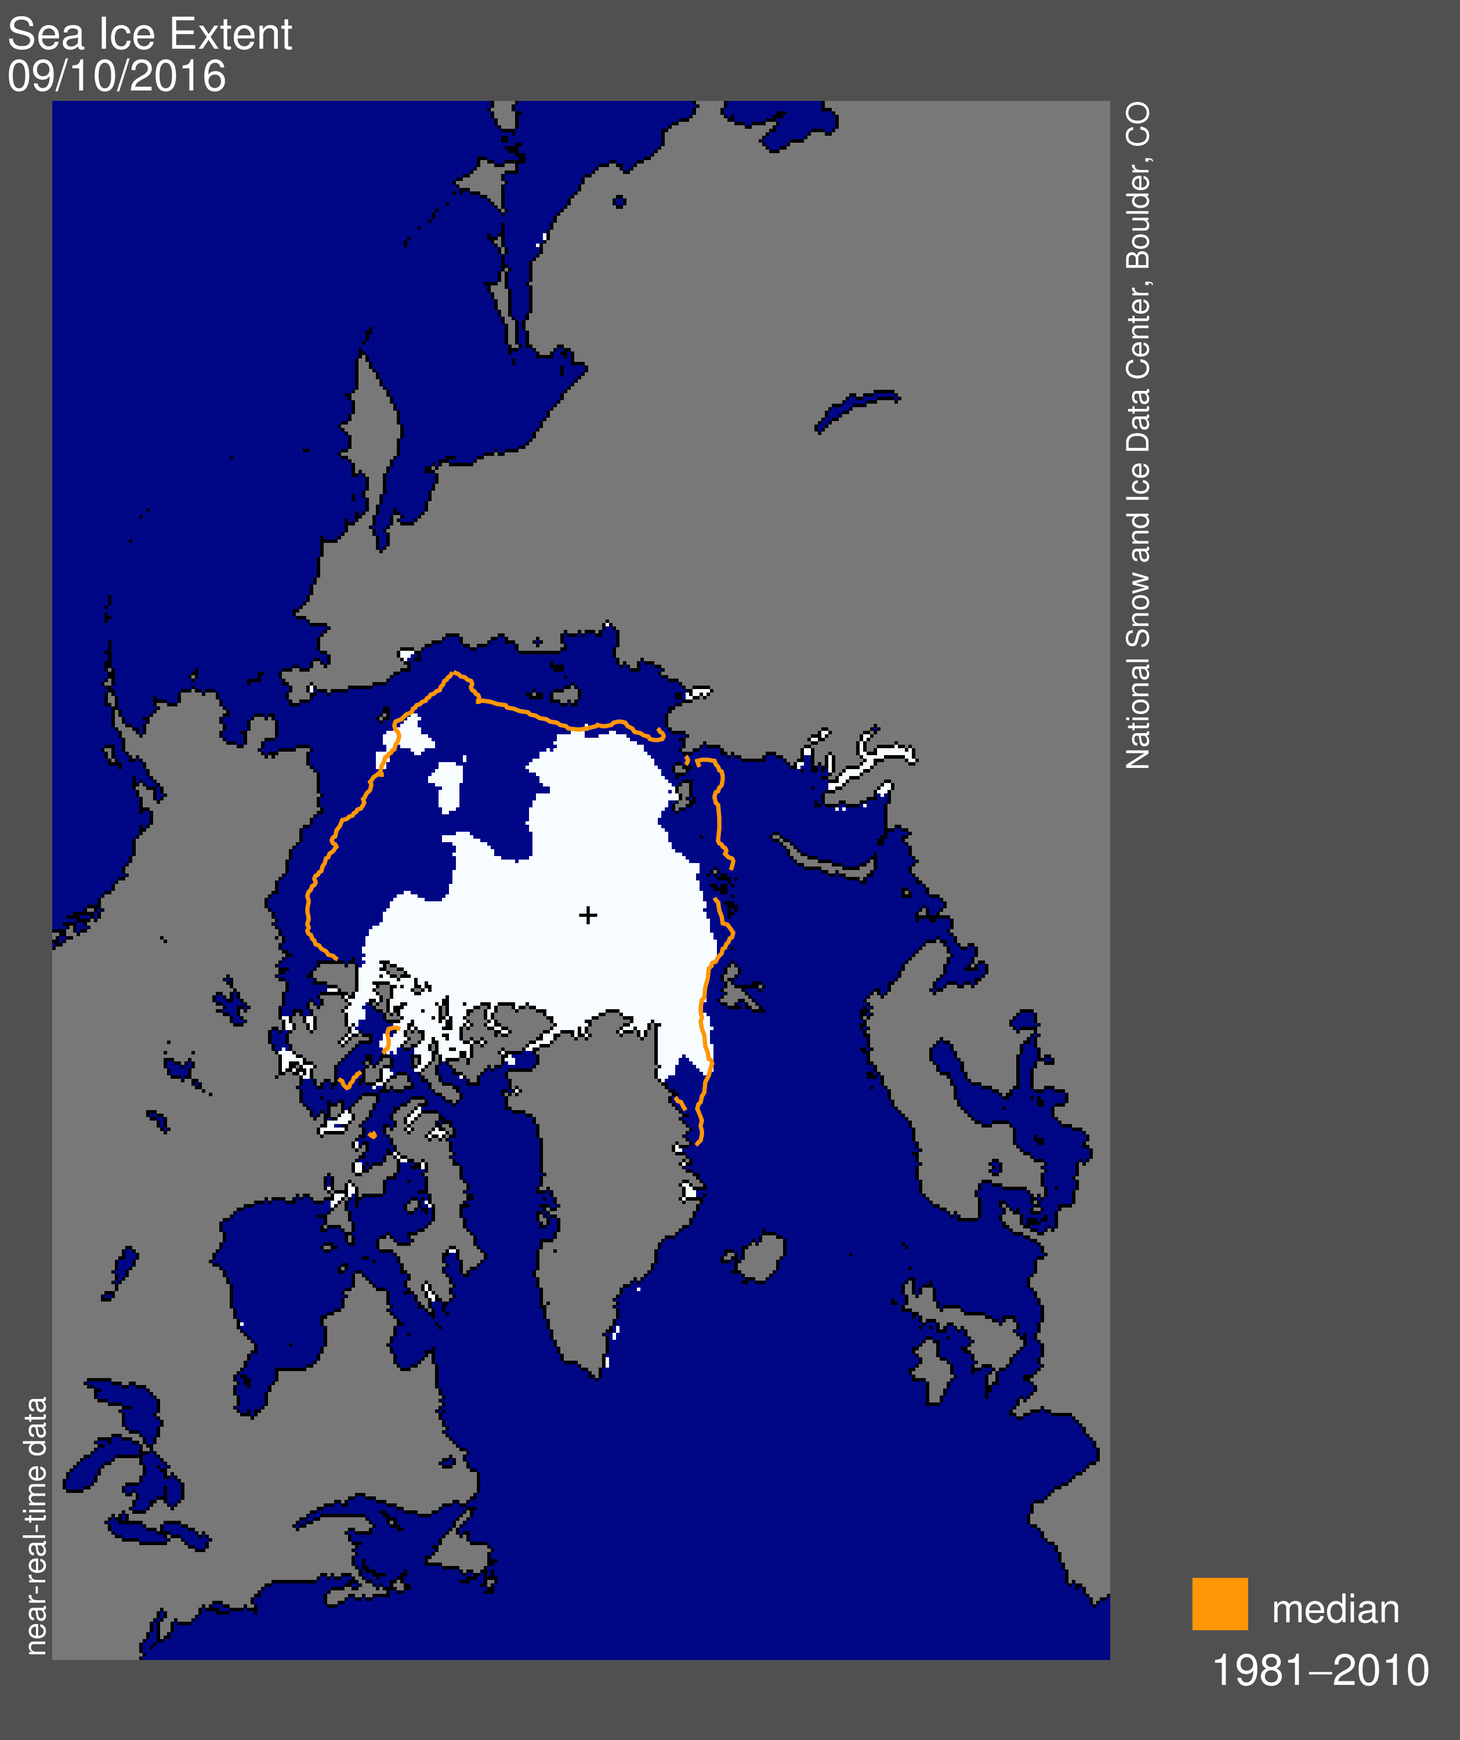 Sea ice had retreated far to the north of the Crystal Serenity's route around Alaska and through the Northwest Passage as of Sept. 10, according to Colorado-based National Snow and Ice Data Center. The orange line shows the mean minimum summertime extent of Arctic sea ice based on satellite measurements taken in mid-September from 1981 to 2010. (Grpahic courtesy of NSIDC)